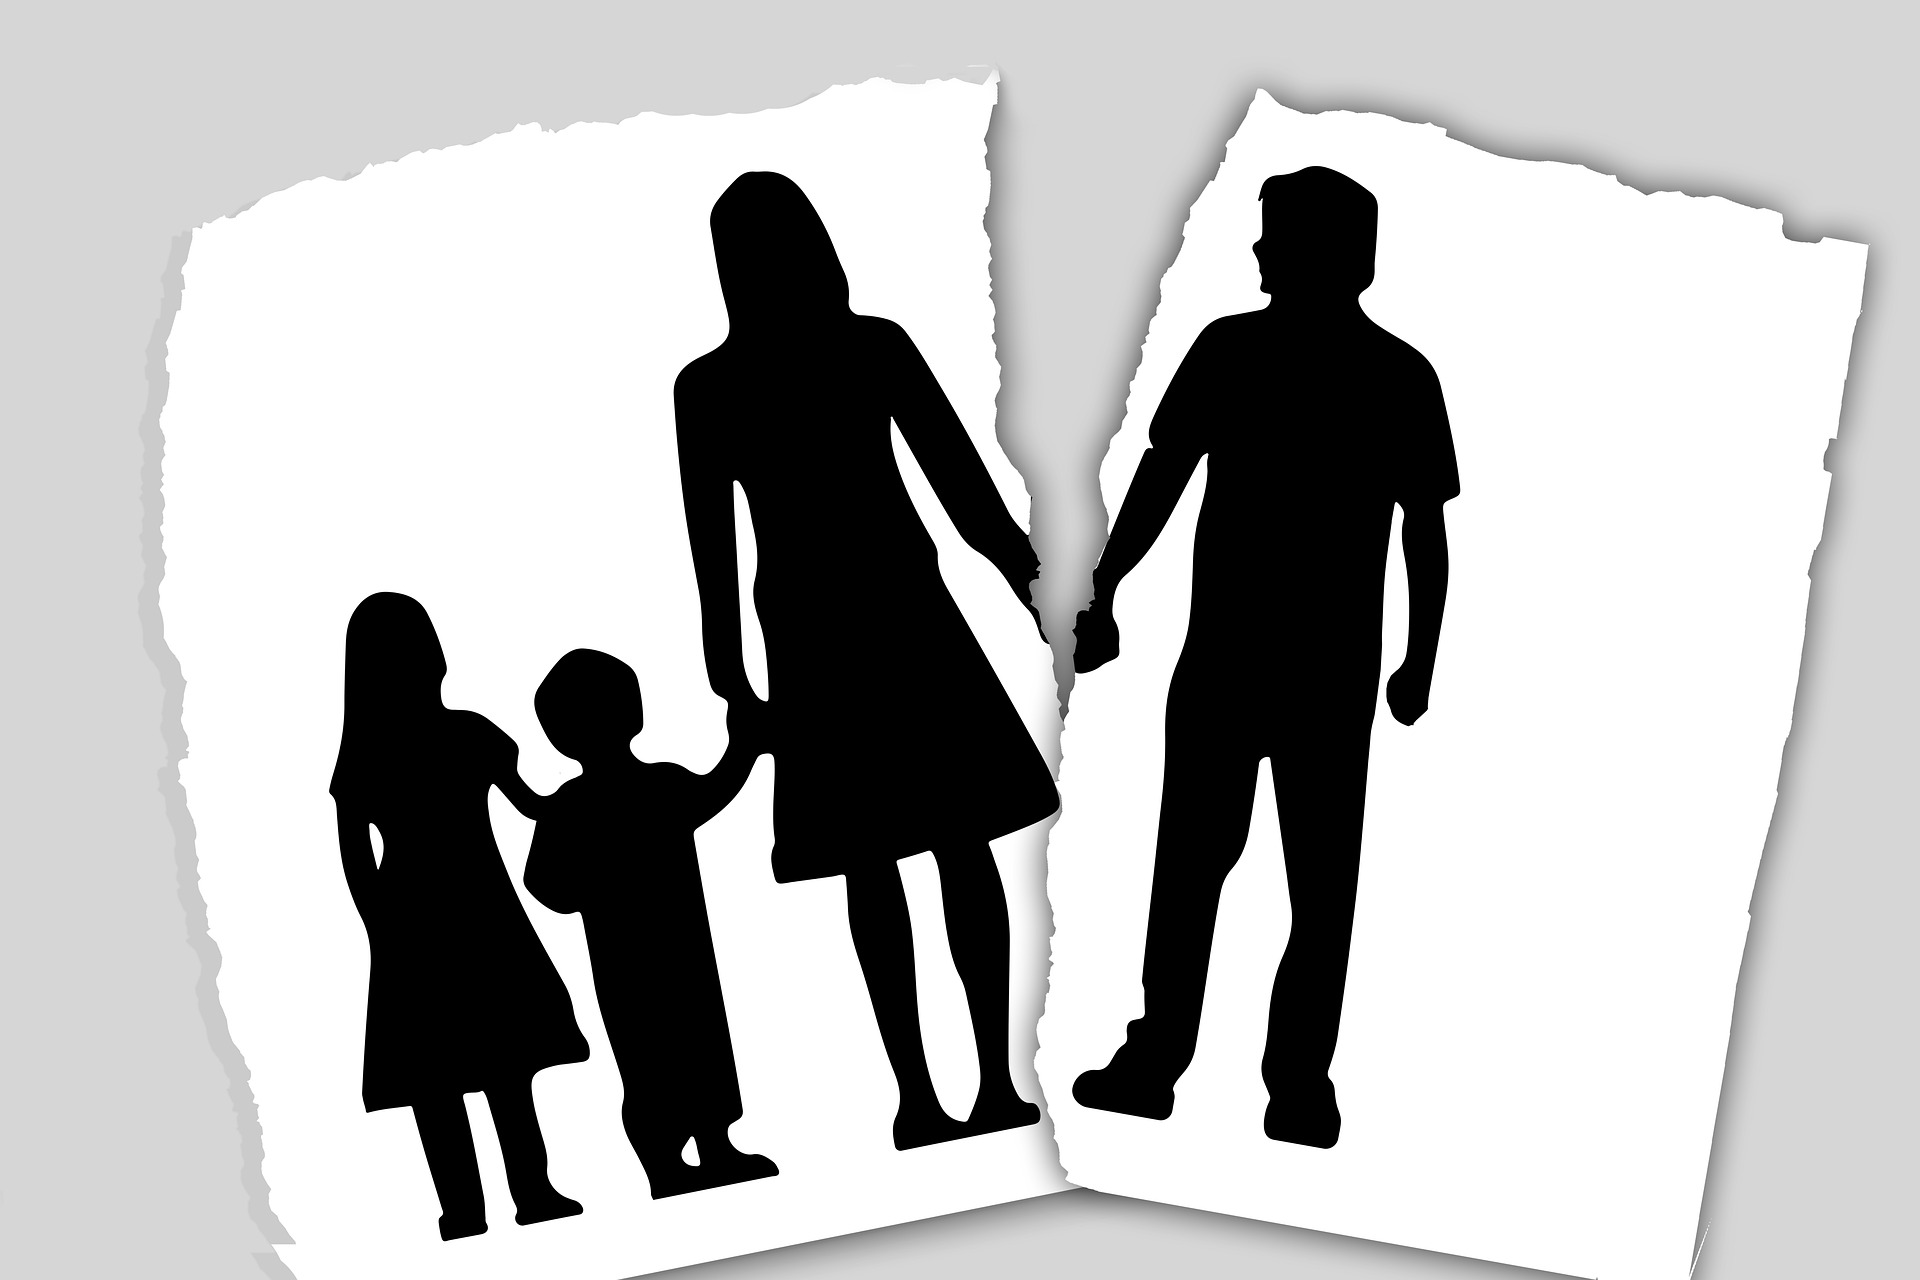 Family-Based Treatment with divorced families [Image description: a black and white drawing of a family of 4 with a tear between the 2 parents] Representing a possible family seeking FBT in Los Angeles, CA